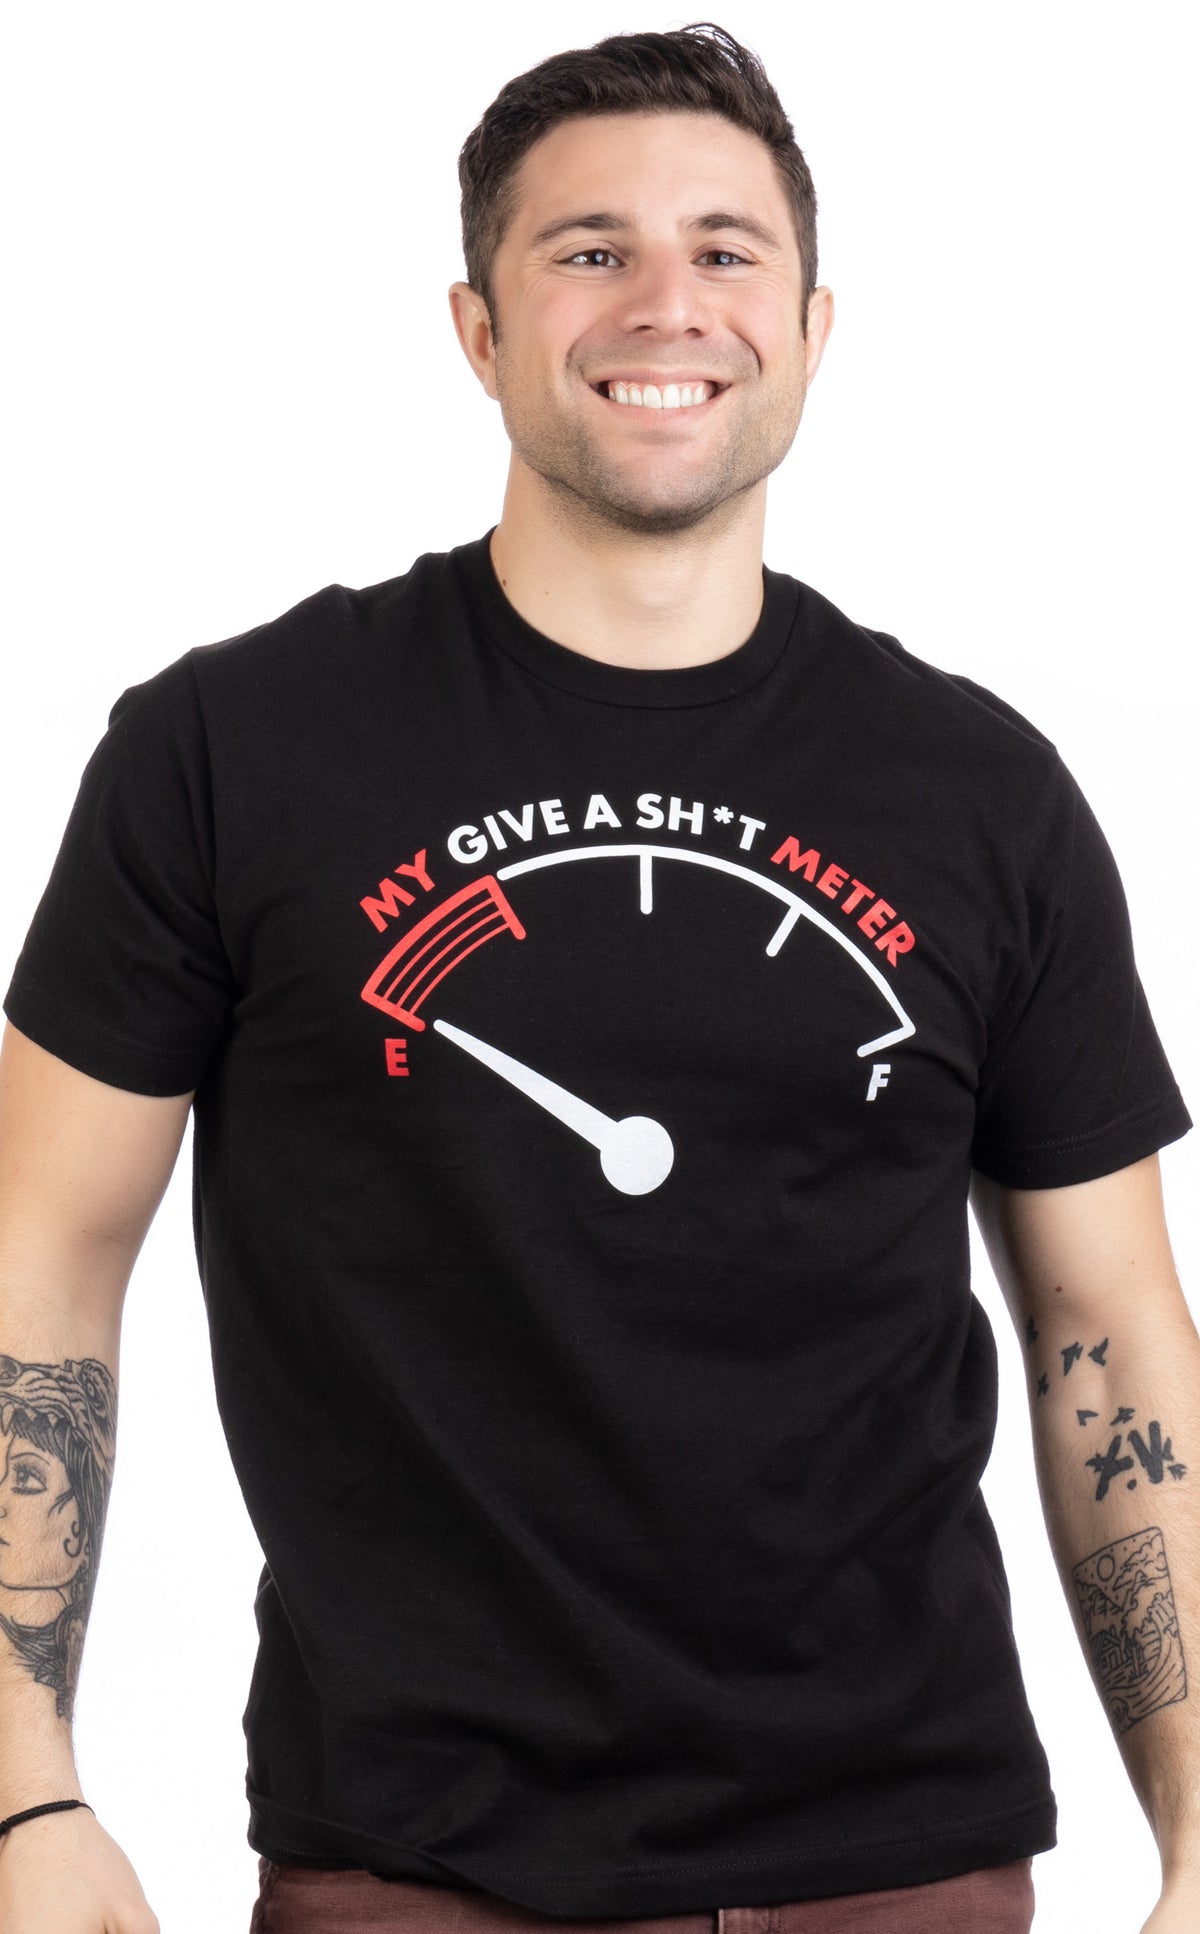 My Give a Sh*t Meter is Empty - Funny Sarcastic Saying Comment Joke T-shirt